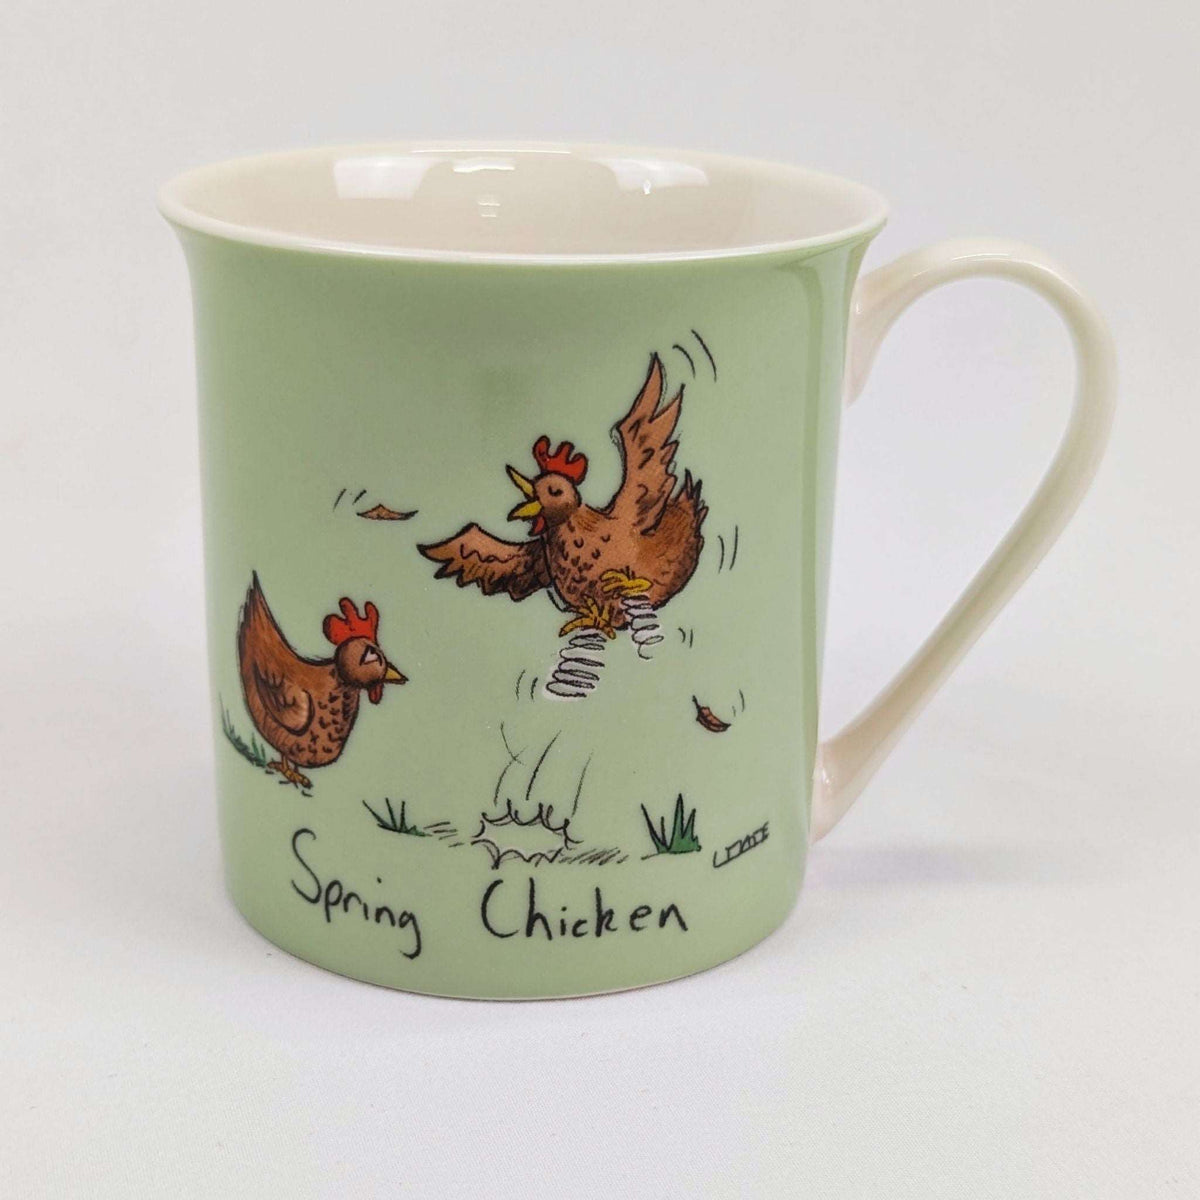 Louise Tate Spring Chicken Mug - Cluck It All Farms